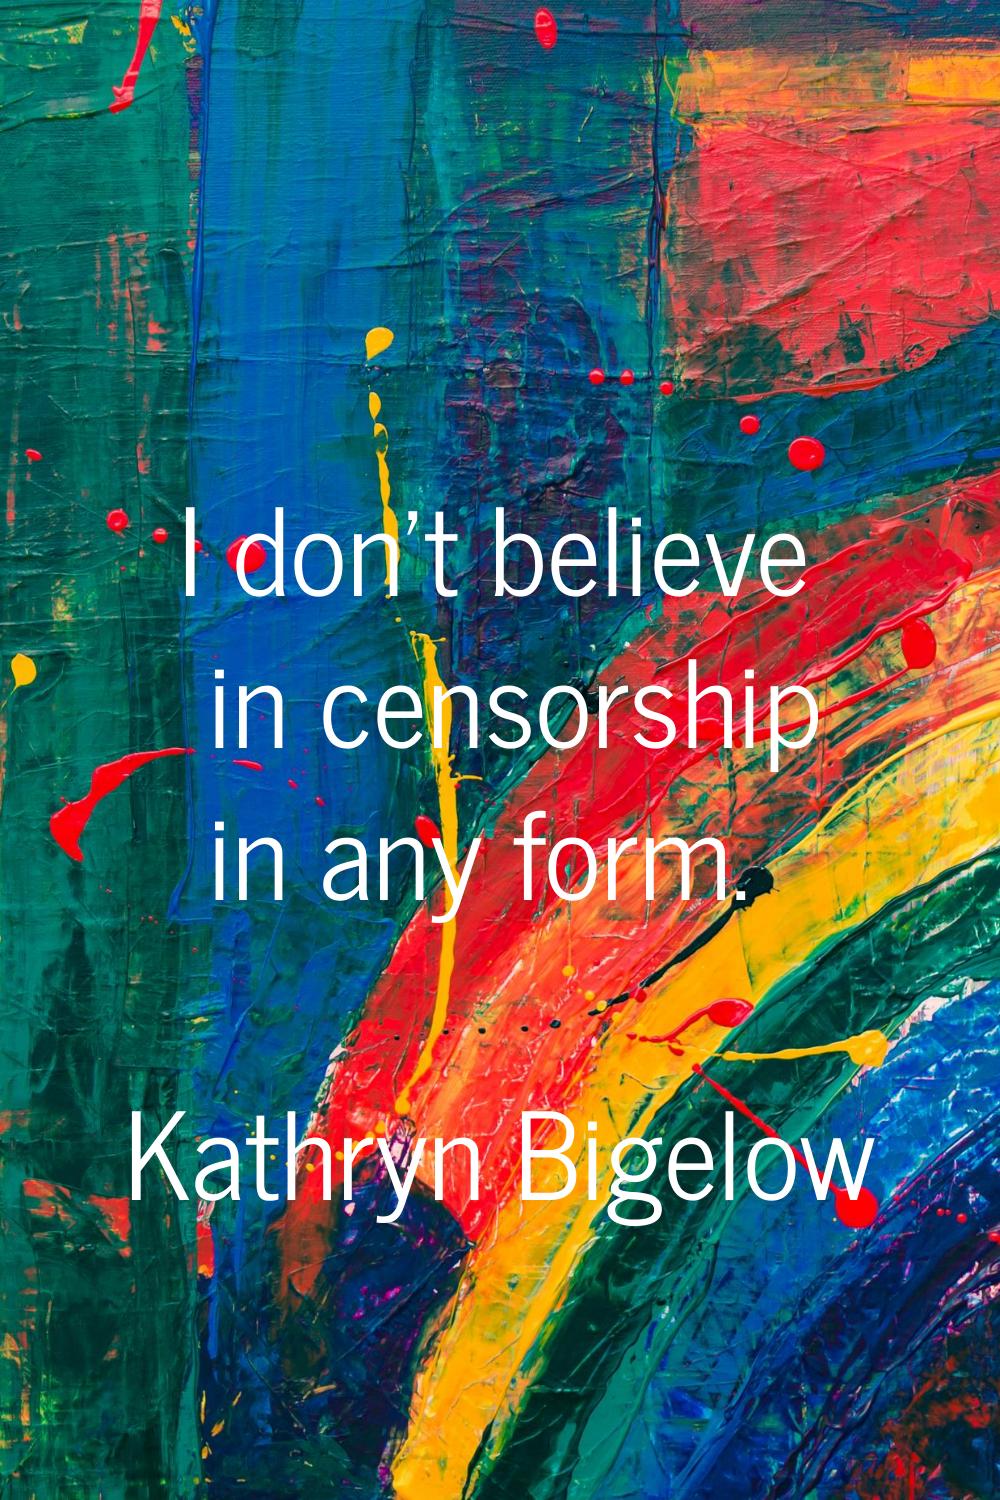 I don't believe in censorship in any form.